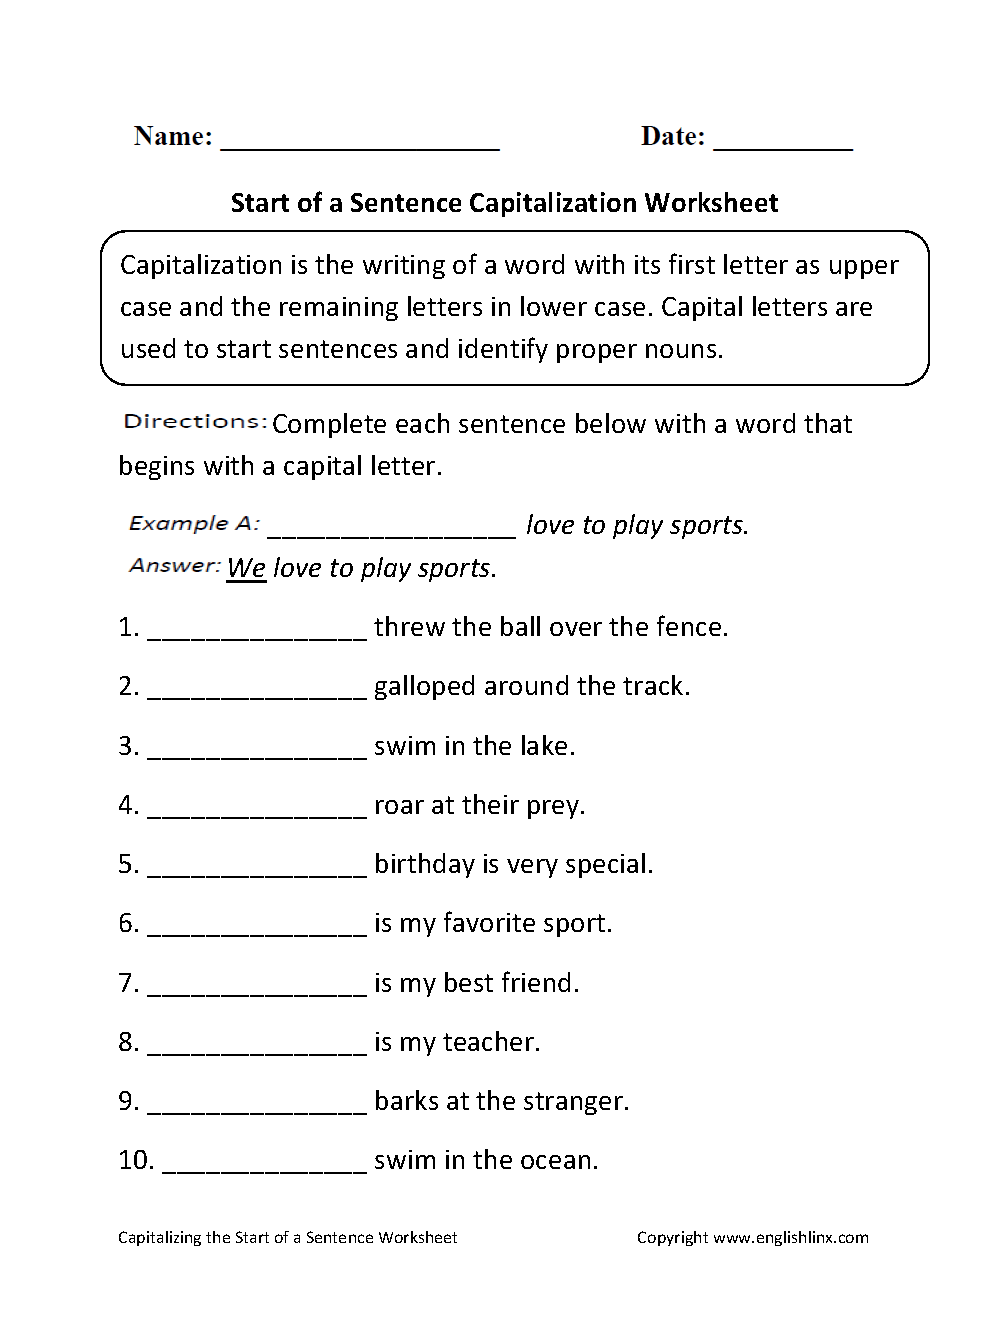 capitalization-worksheet-1-preview